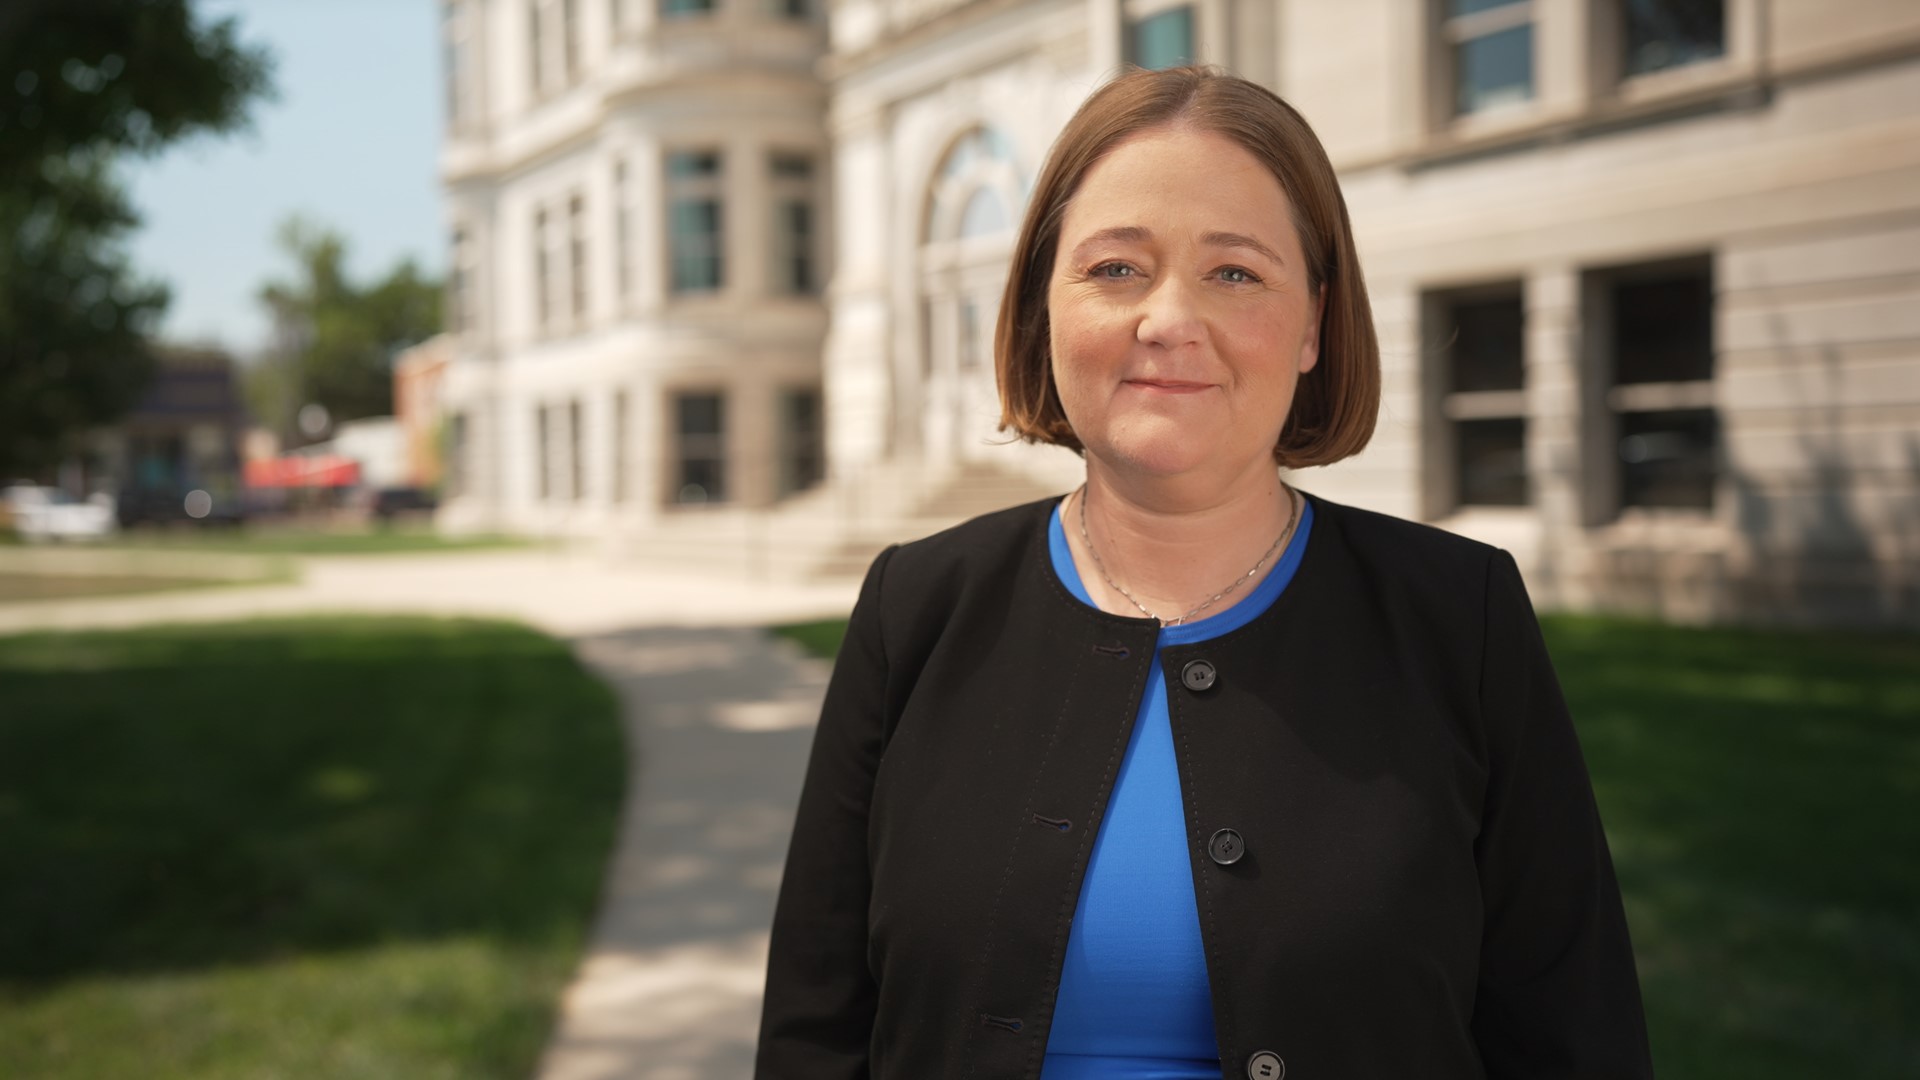 "Iowa’s law is clear; sexually explicit books and materials have no place in our elementary school classrooms or libraries," Iowa Attorney General Brenna Bird said.